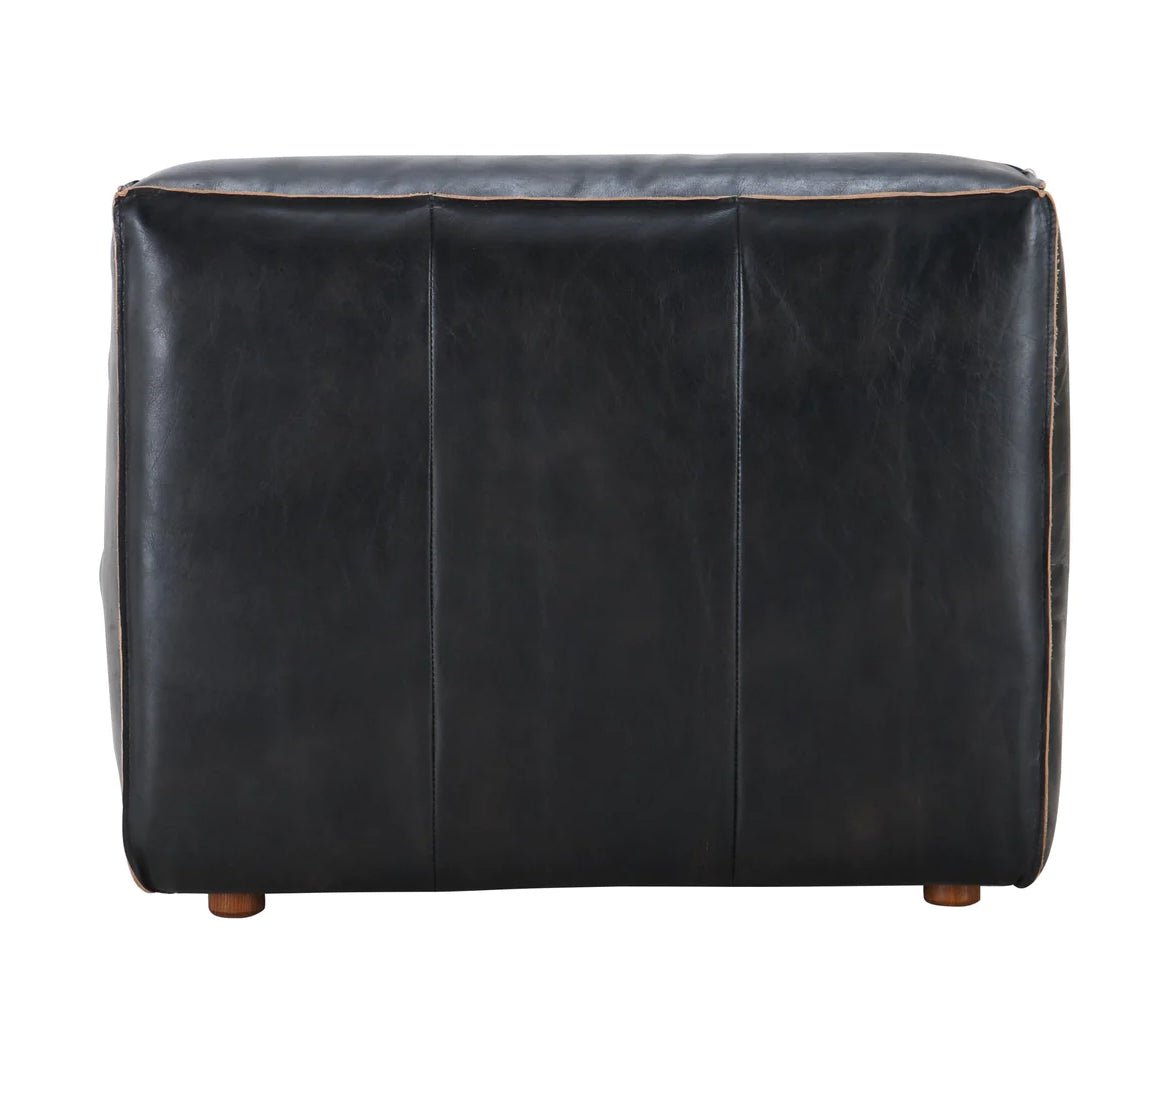 ‘Luxe’ Slipper Chair (Black) - EcoLuxe Furnishings